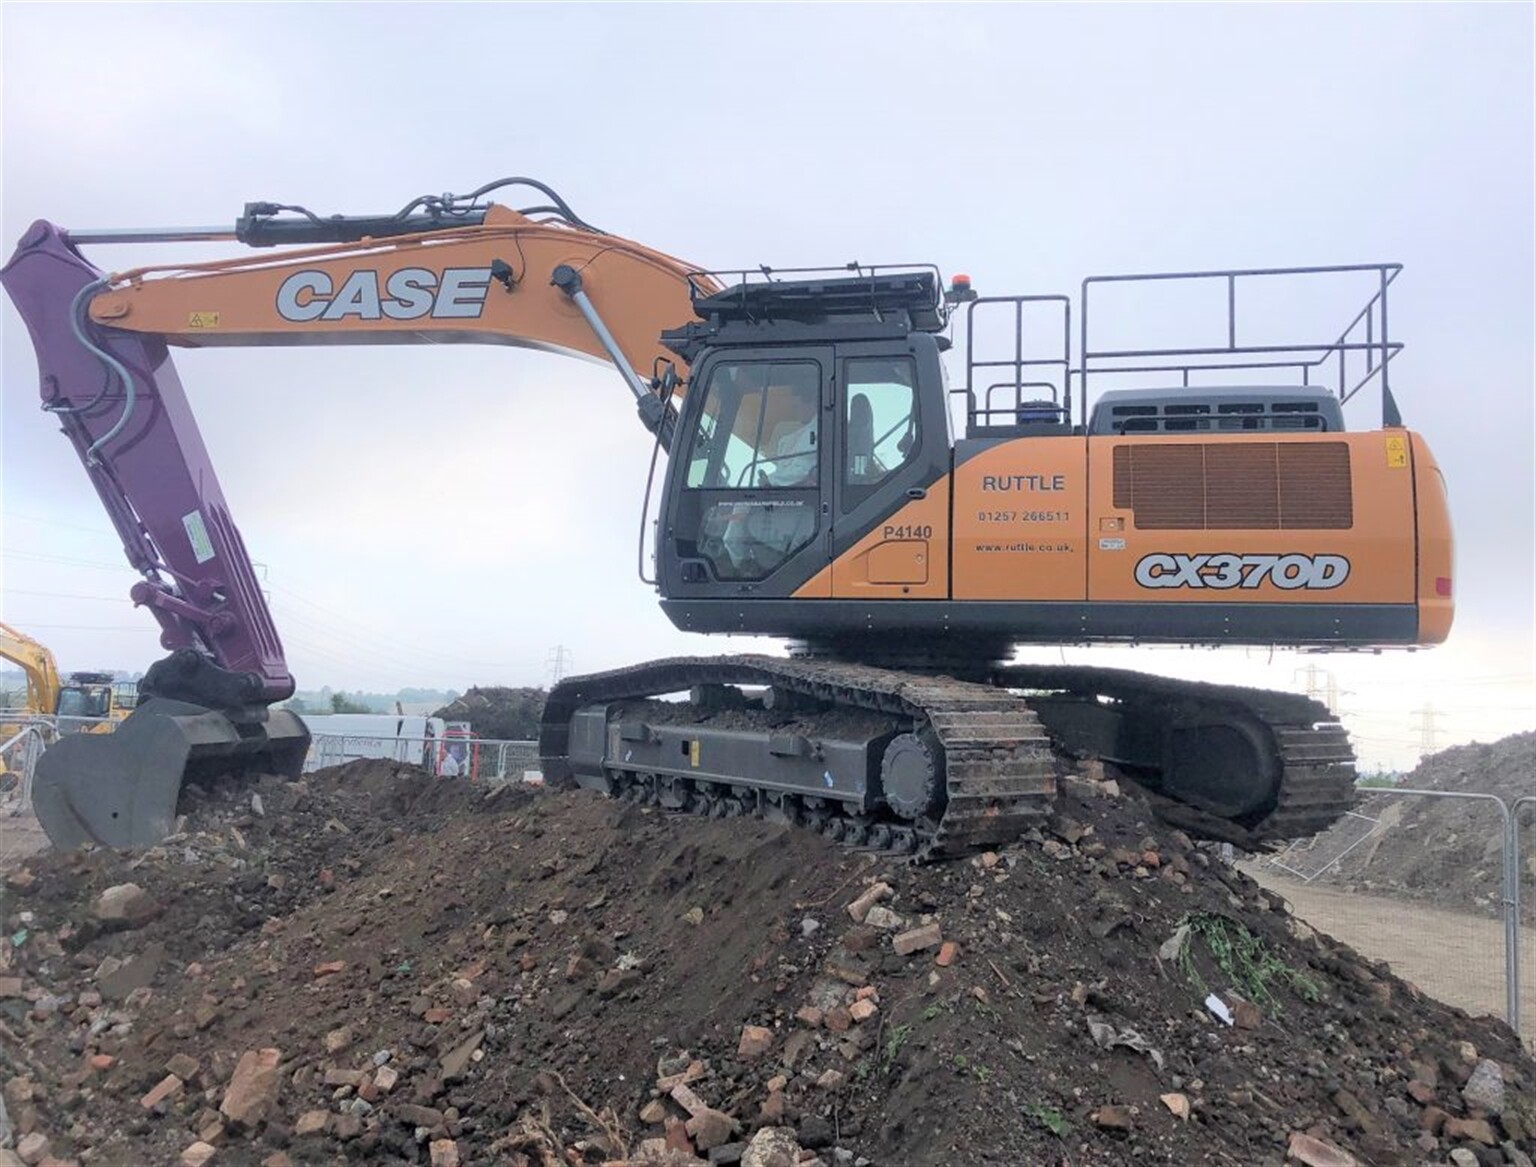 Ruttle Plant Gears up with 12 new CASE Excavators